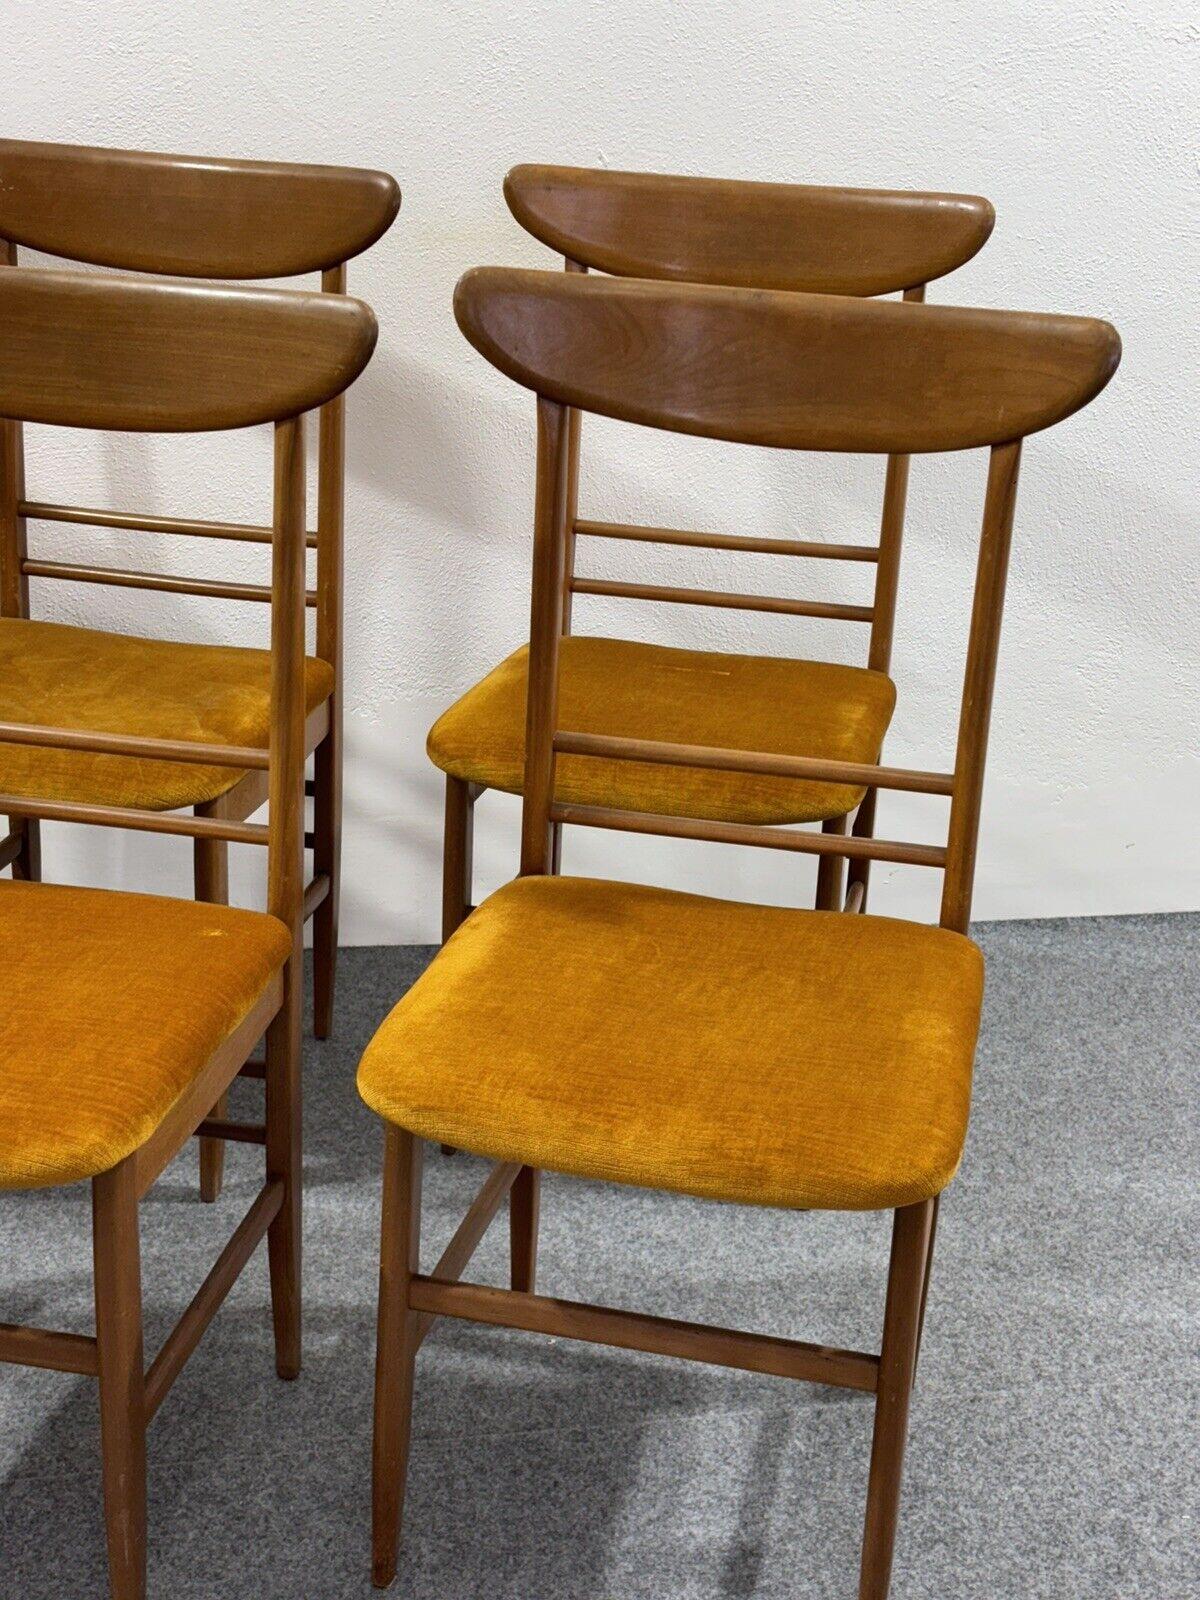 Mid-20th Century Set of 6 Dining Chairs Danish Design 1960's For Sale